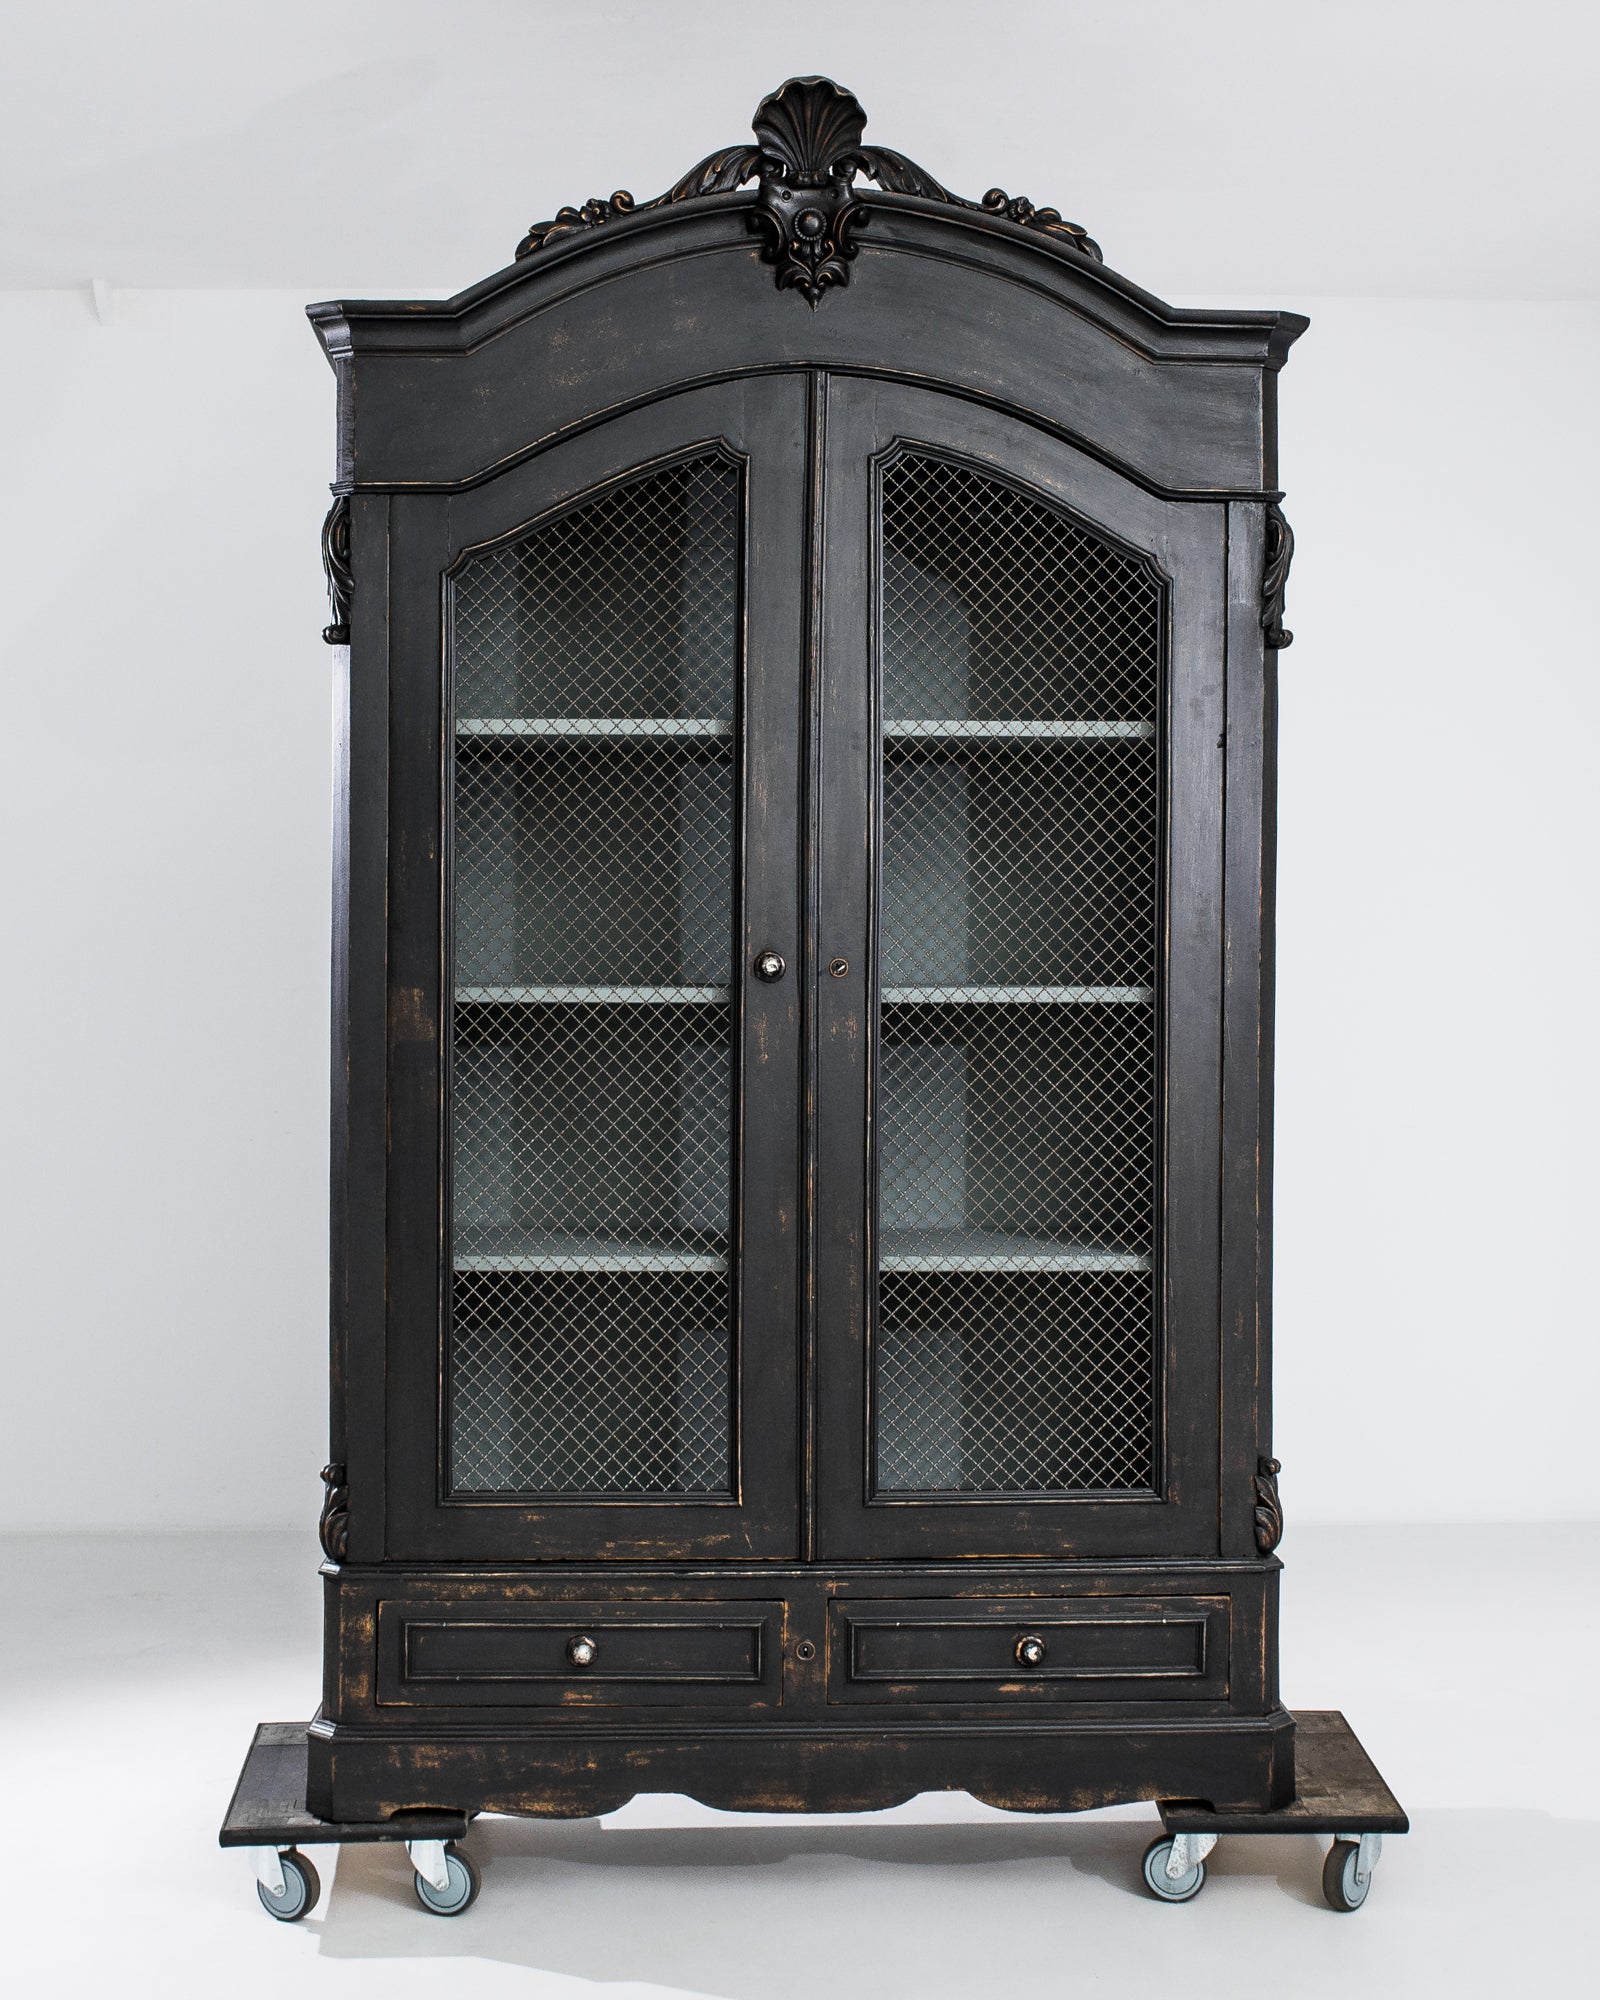 A baroque influenced silhouette and midnight black finish give this antique wooden cabinet a somber, striking presence. Made in France in the 1880s, the wire mesh covering the panels of the doors indicate that the cabinet would have originally been